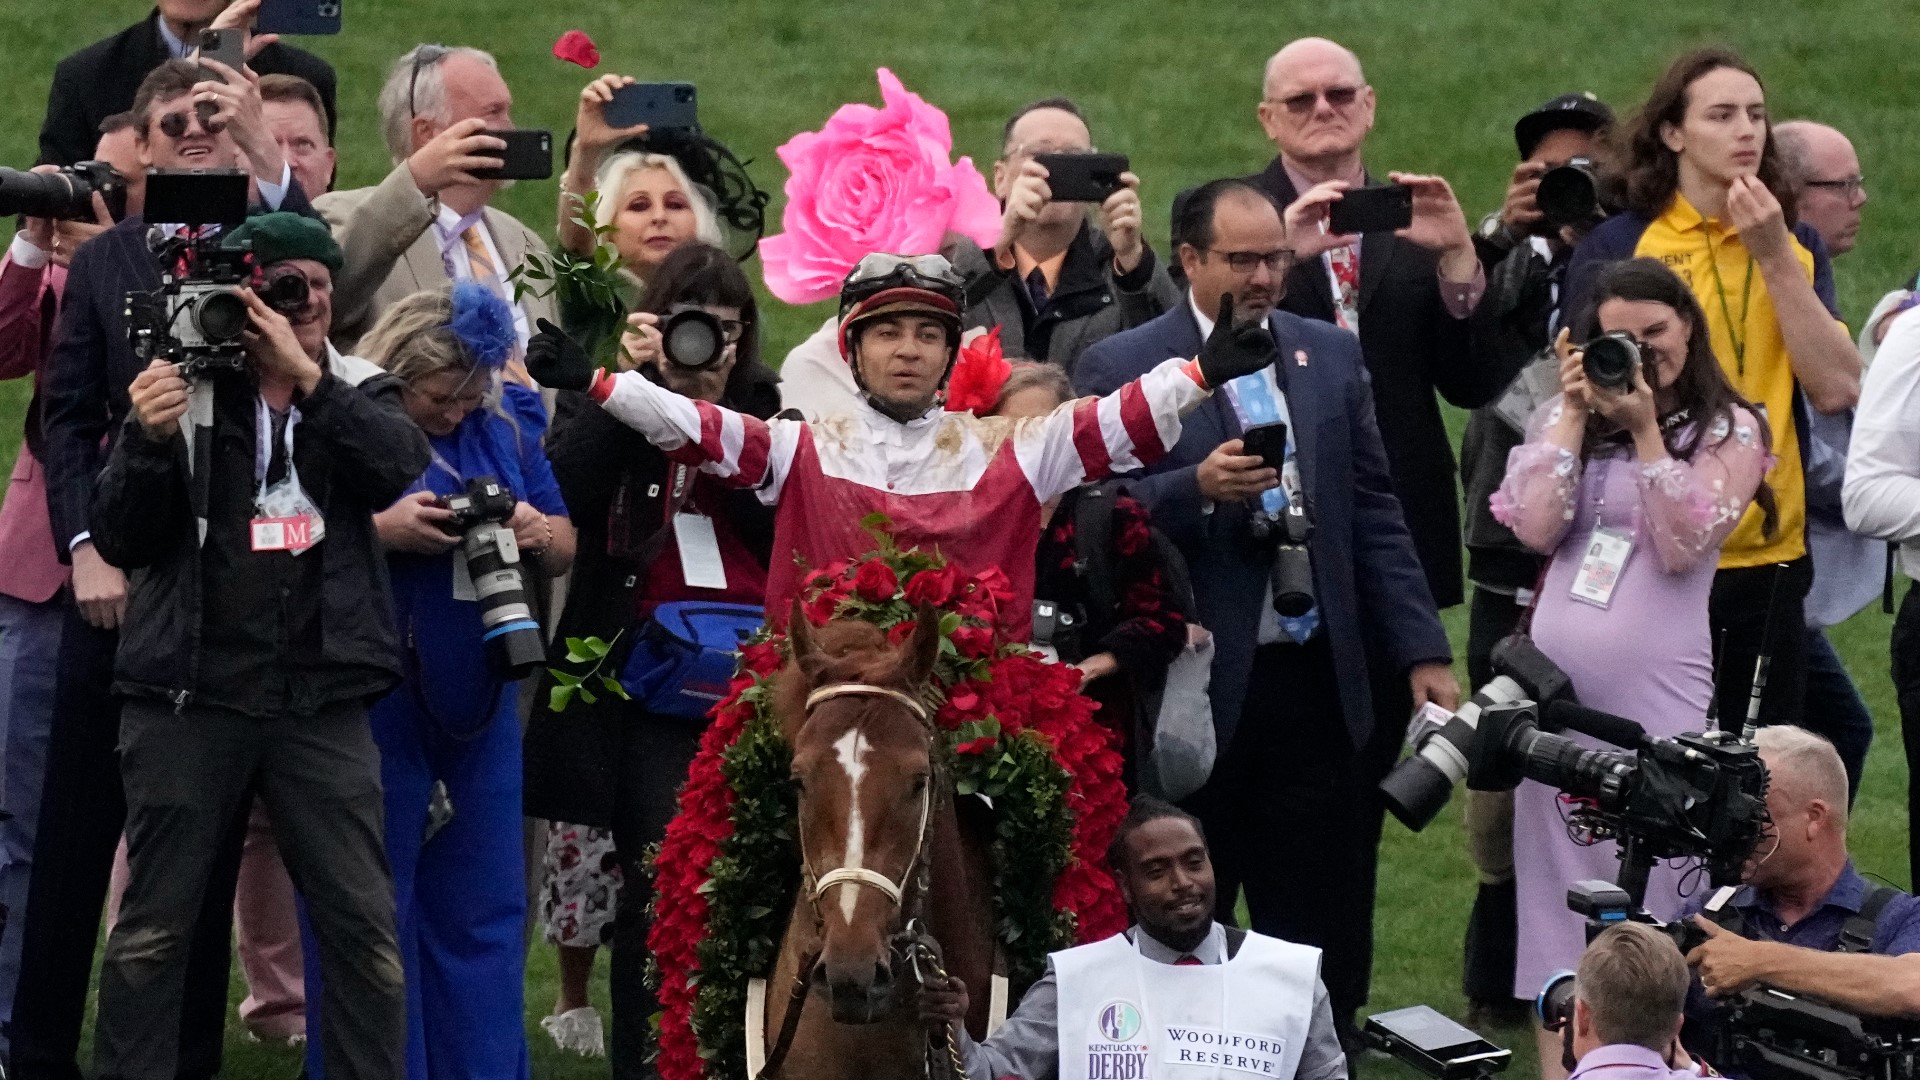 The VERIFY team found no record of Leon declining an invitation to the White House online or in video following his Kentucky Derby win.